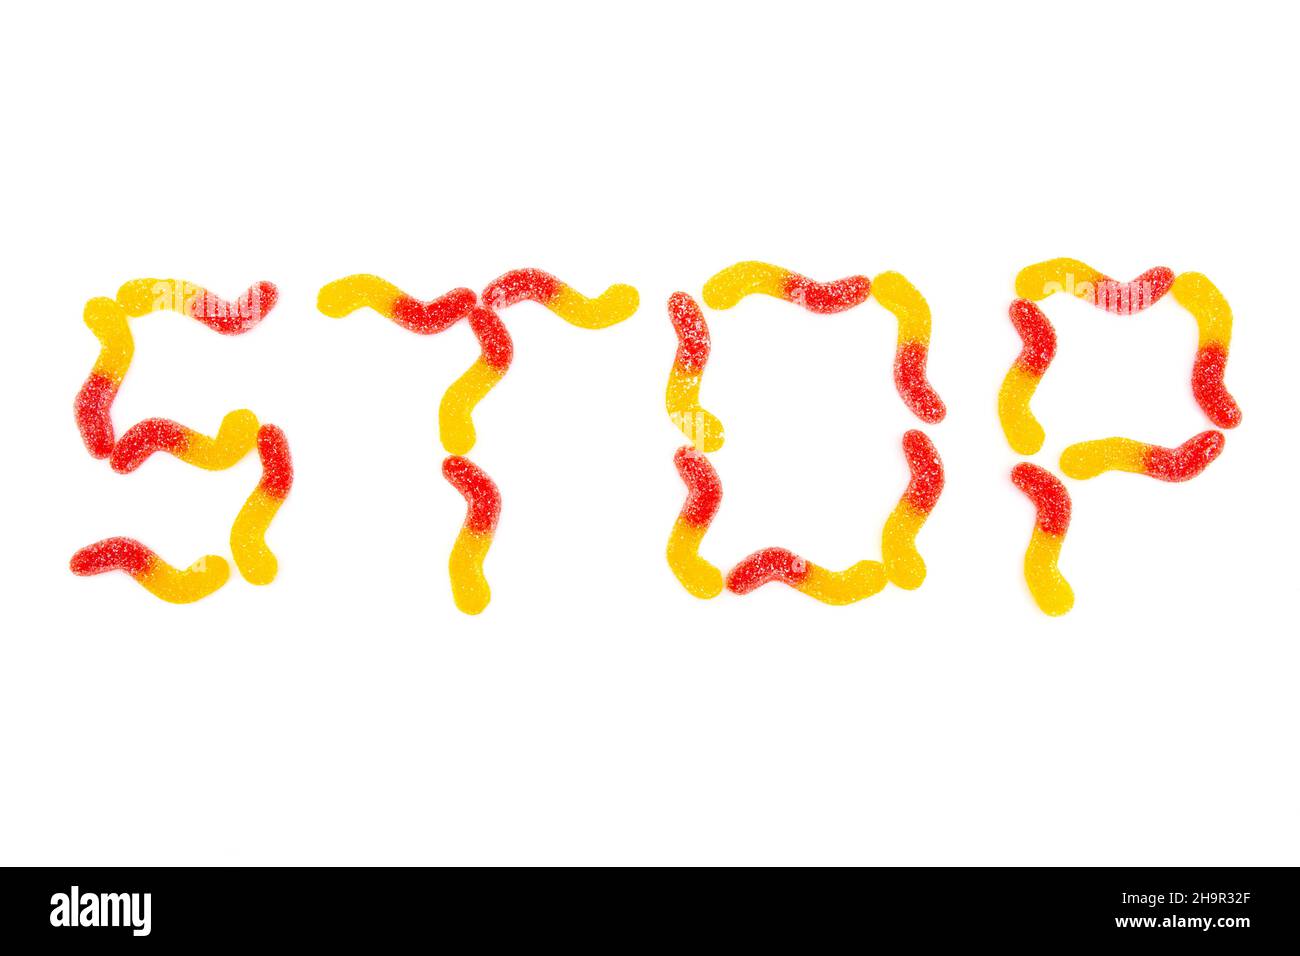 Word STOP made from multicolored gummy worms isolated on white background. Dental problems from chewy candies. Stock Photo